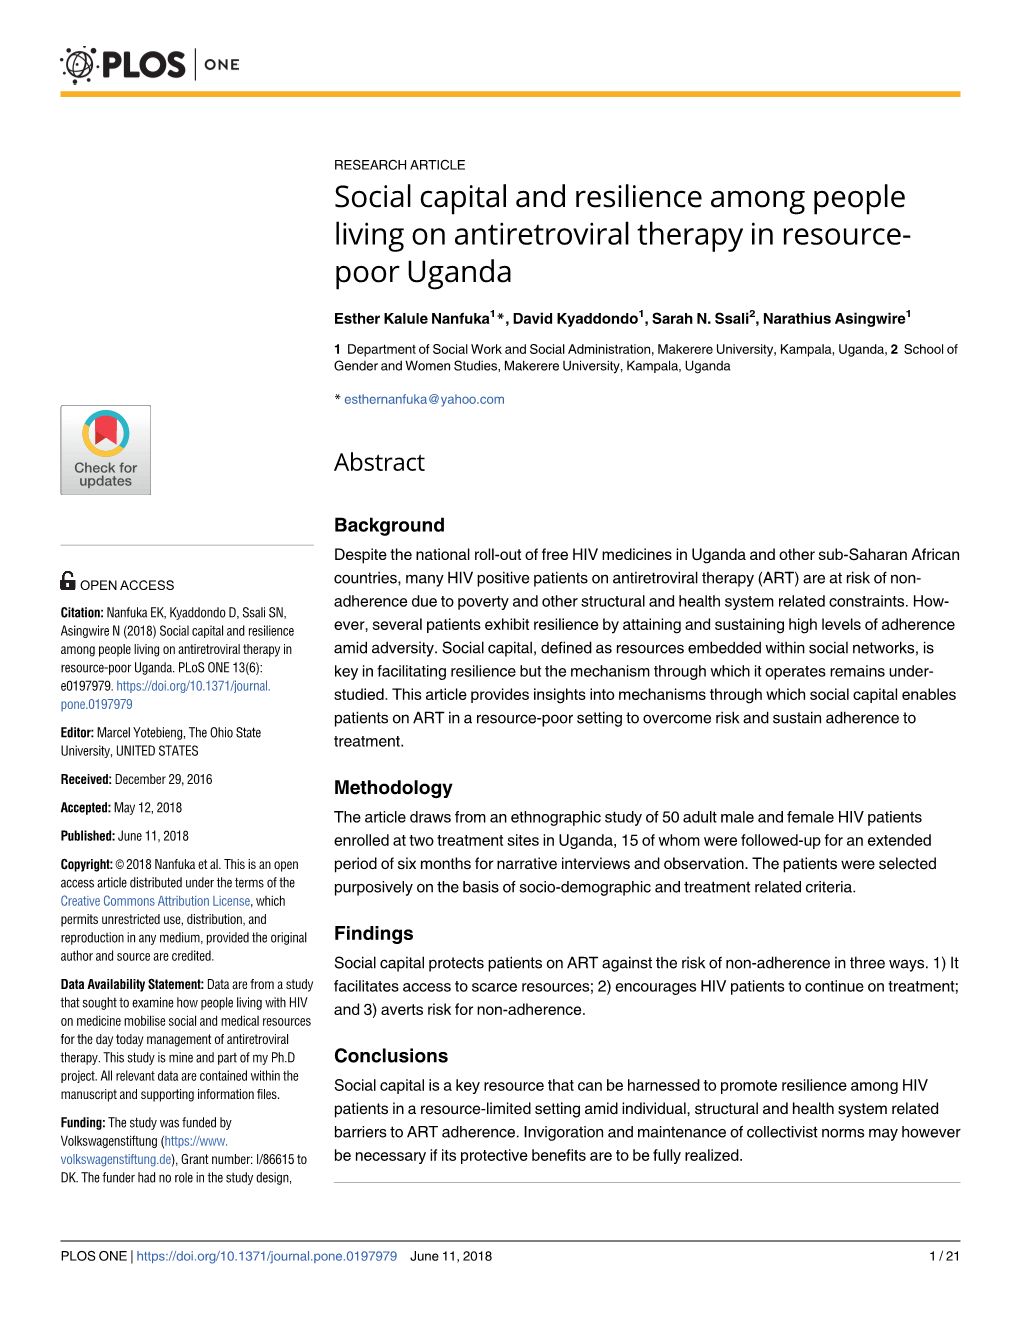 Social Capital and Resilience Among People Living on Antiretroviral Therapy in Resource-Poor Uganda